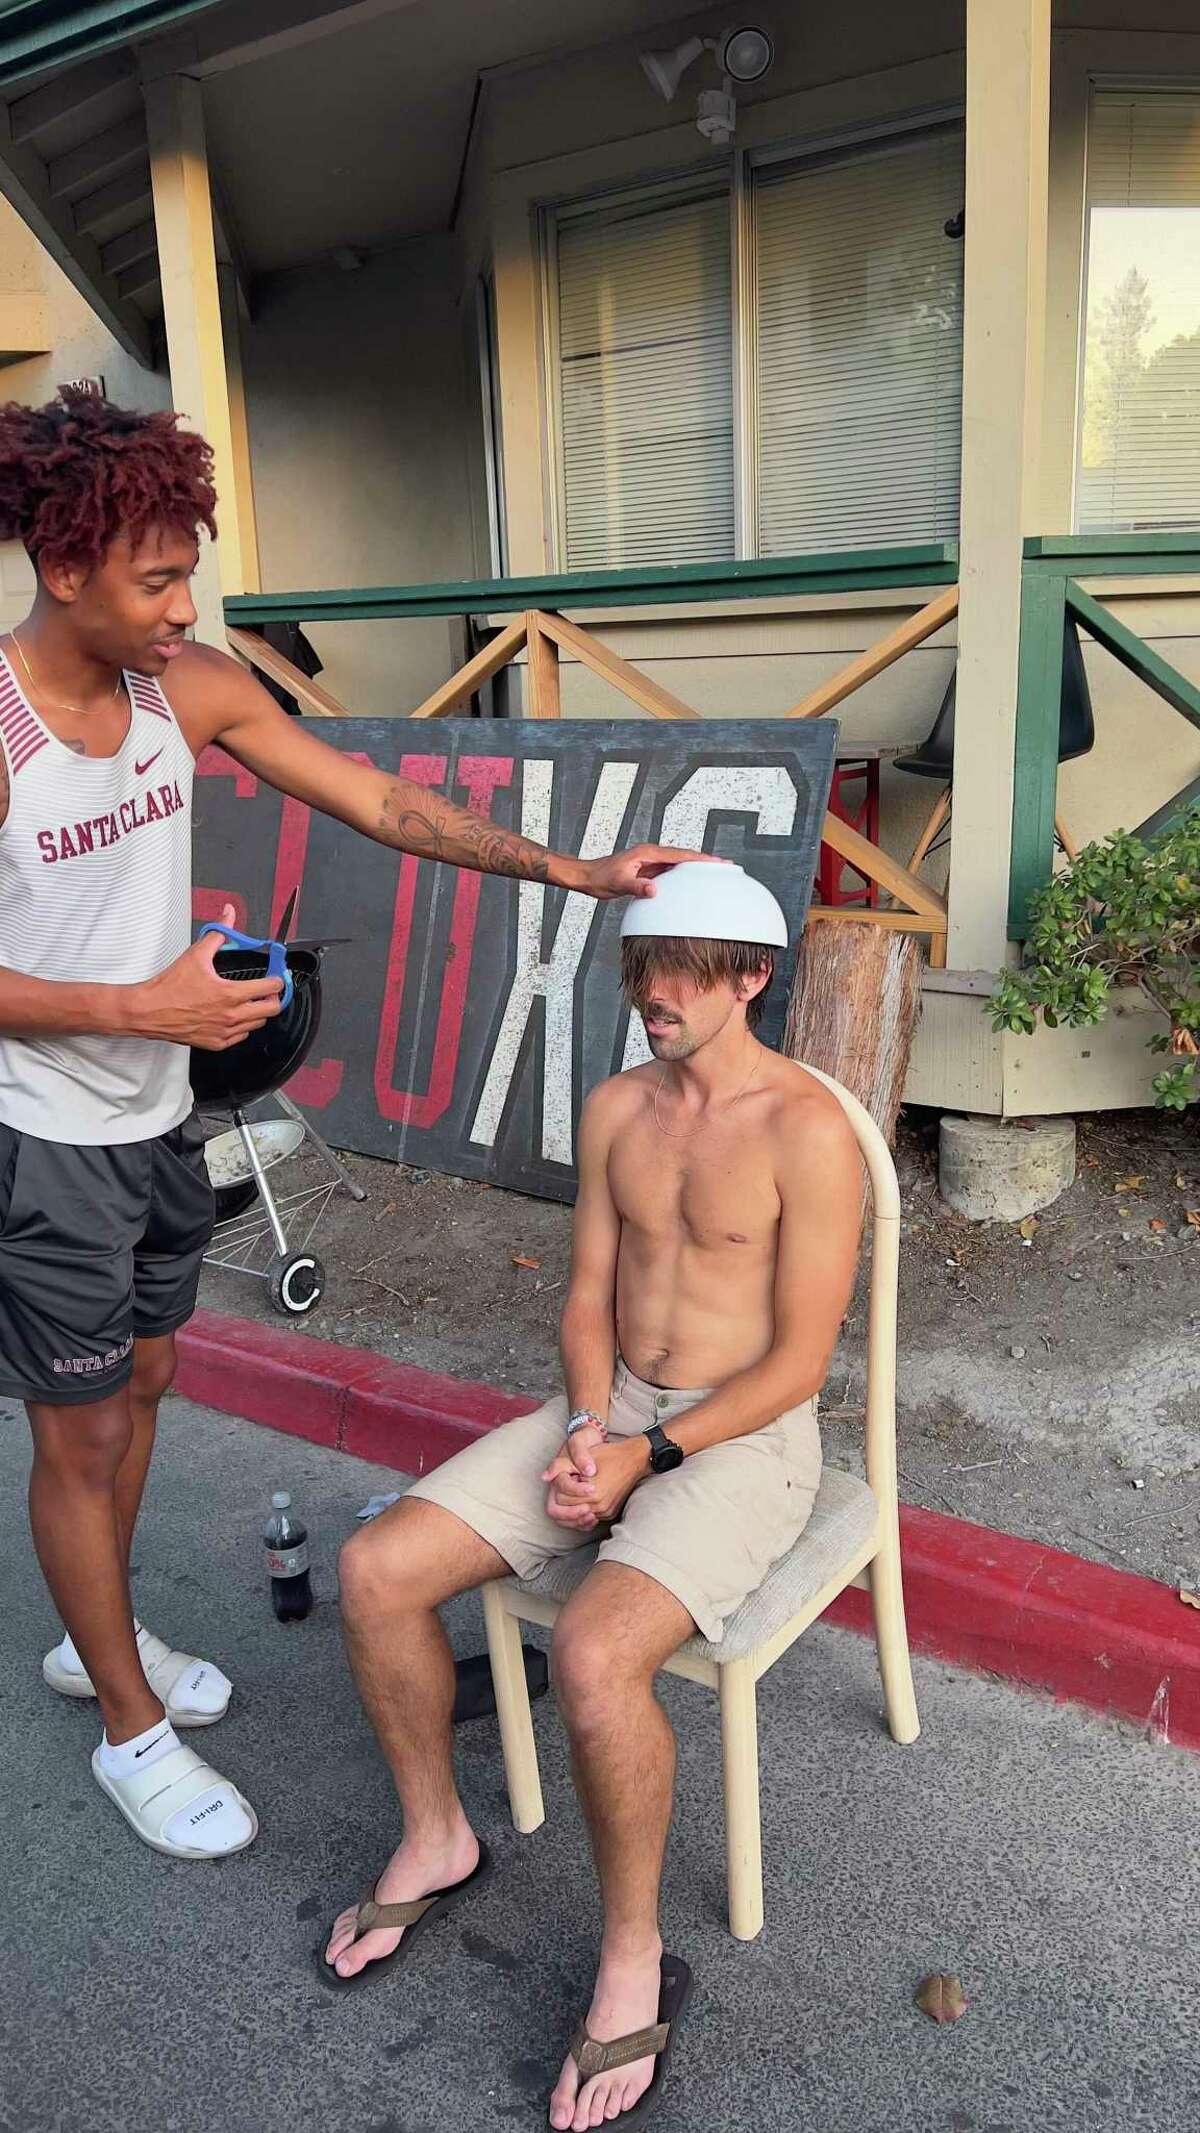 DeVon Dupree gives teammate Harvey Chilcott a bowl cut in preparation for the Santa Clara cross country team’s picture day.